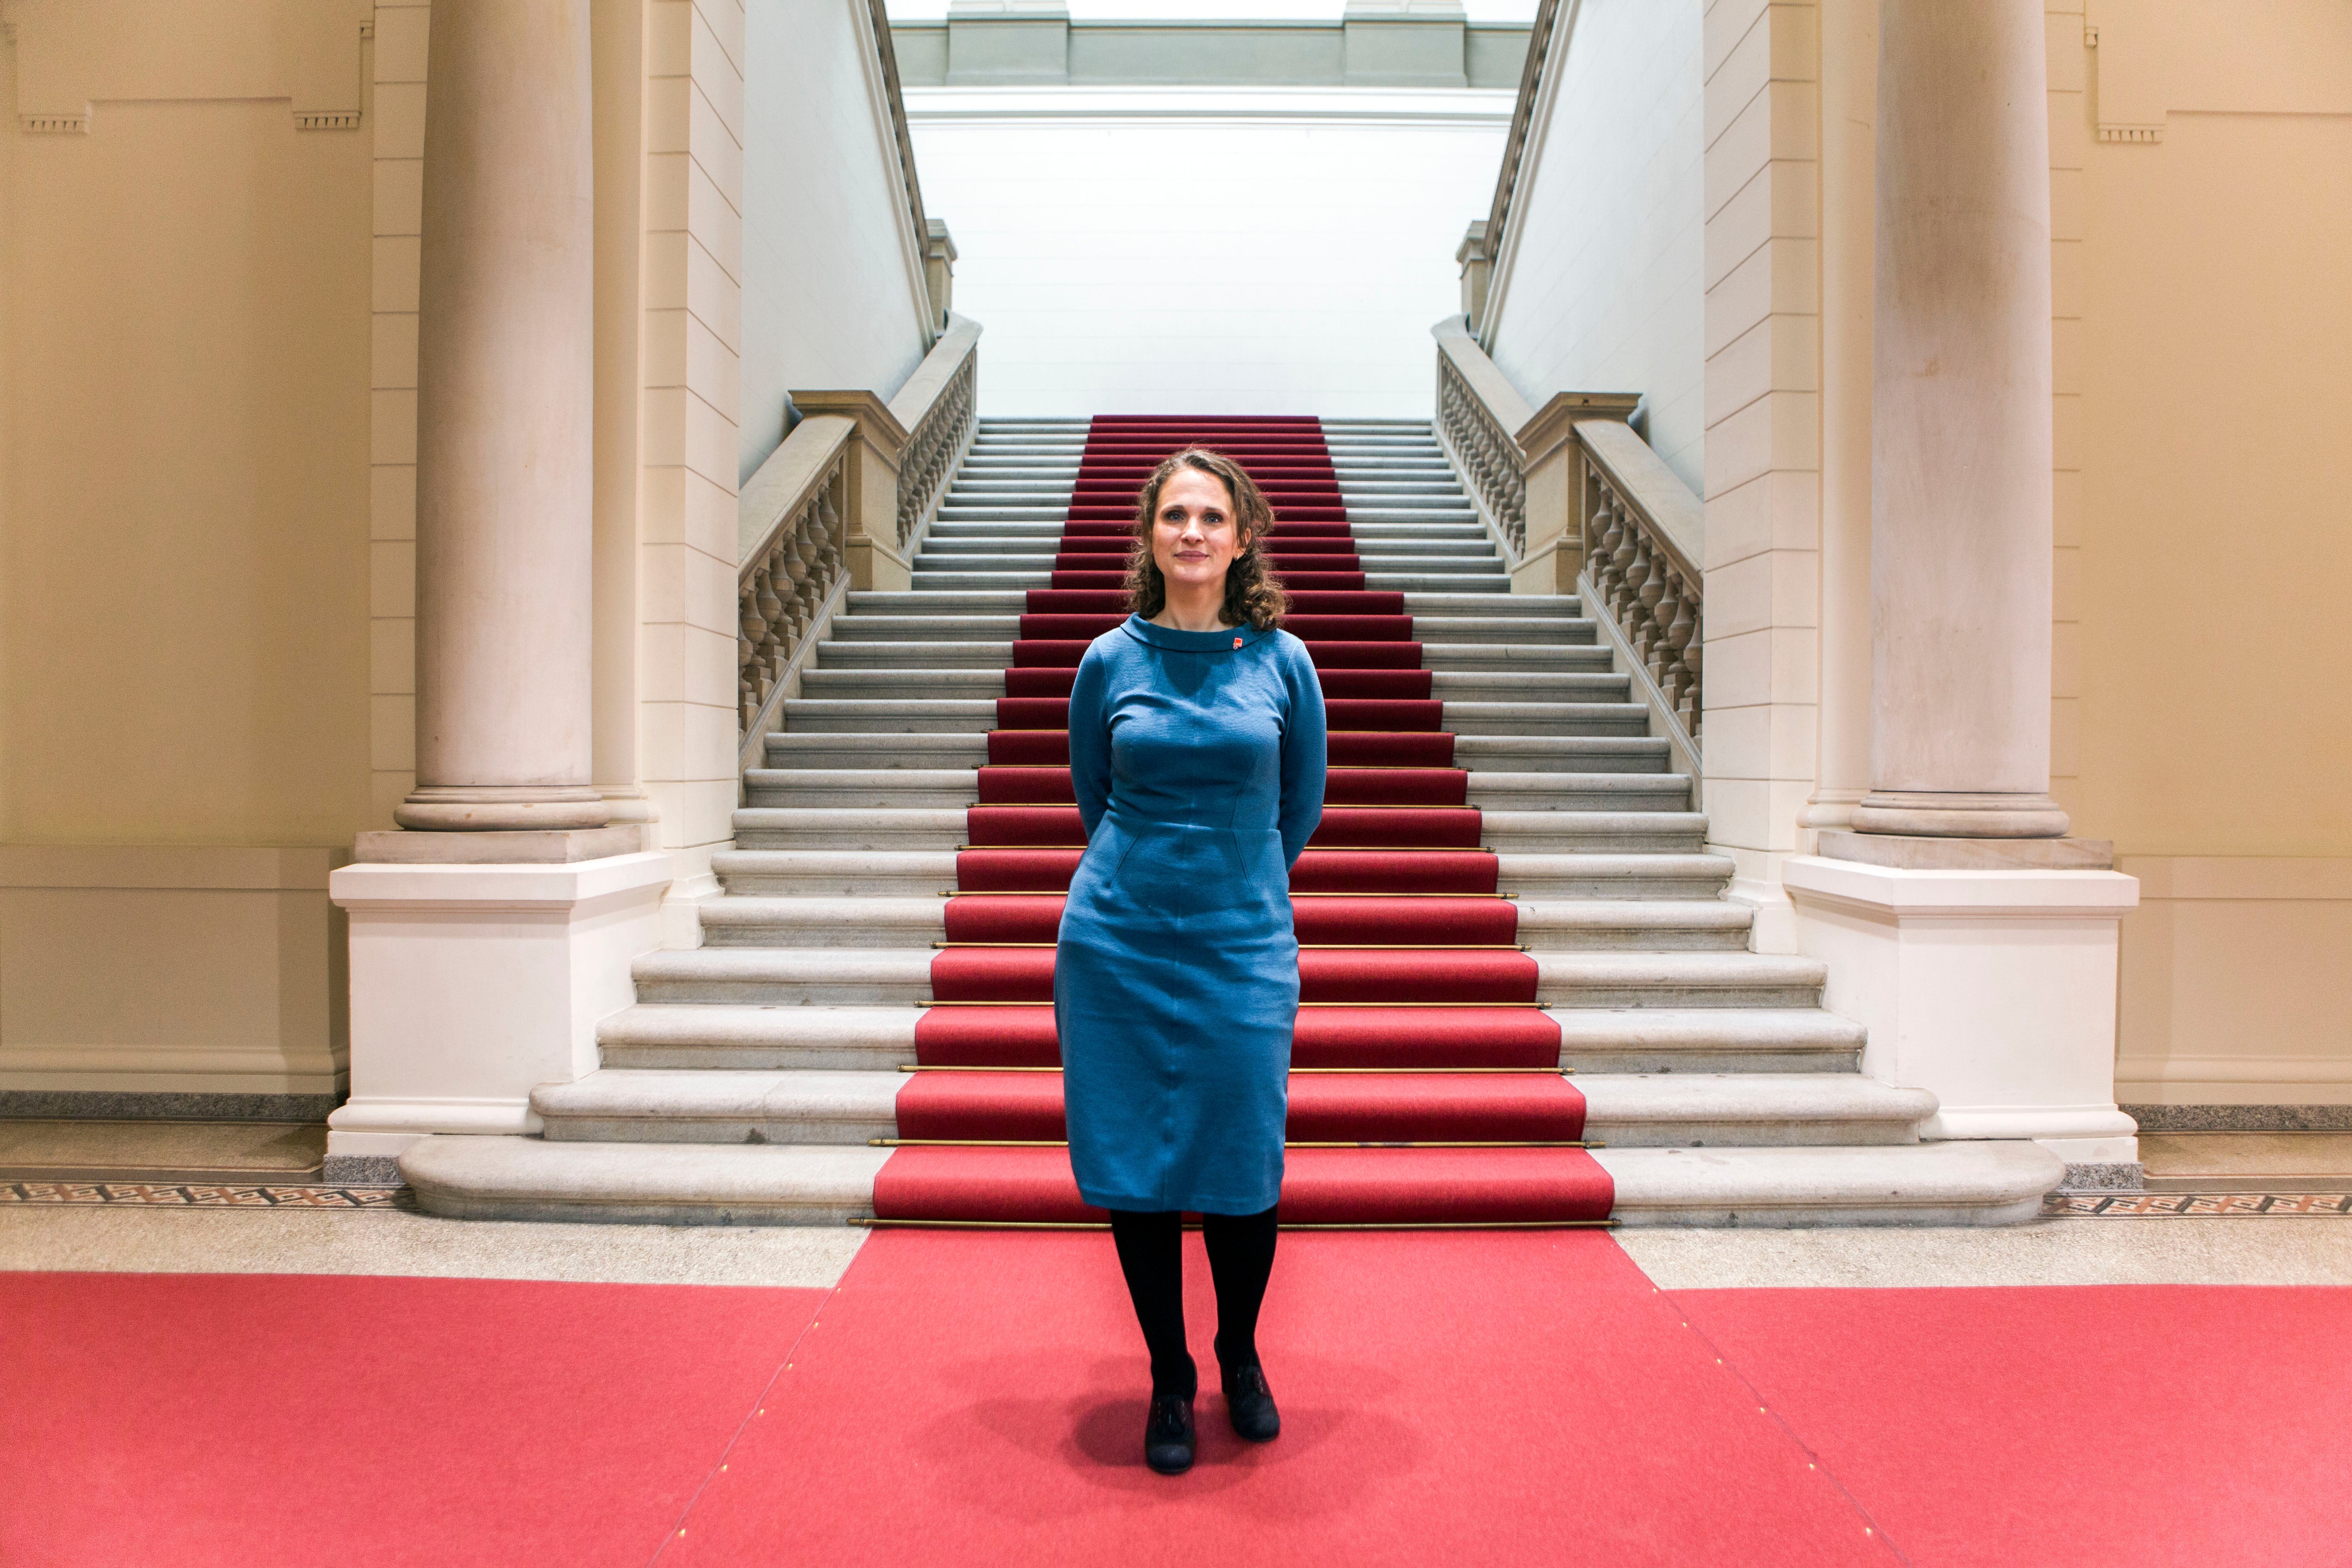 </b> Maja Lasić represents Wedding in Berlin’s Parliament for the Social Democrats, the county’s mainstream left-wing party. (Jessica Kourkounis/For Keystone Crossroads)